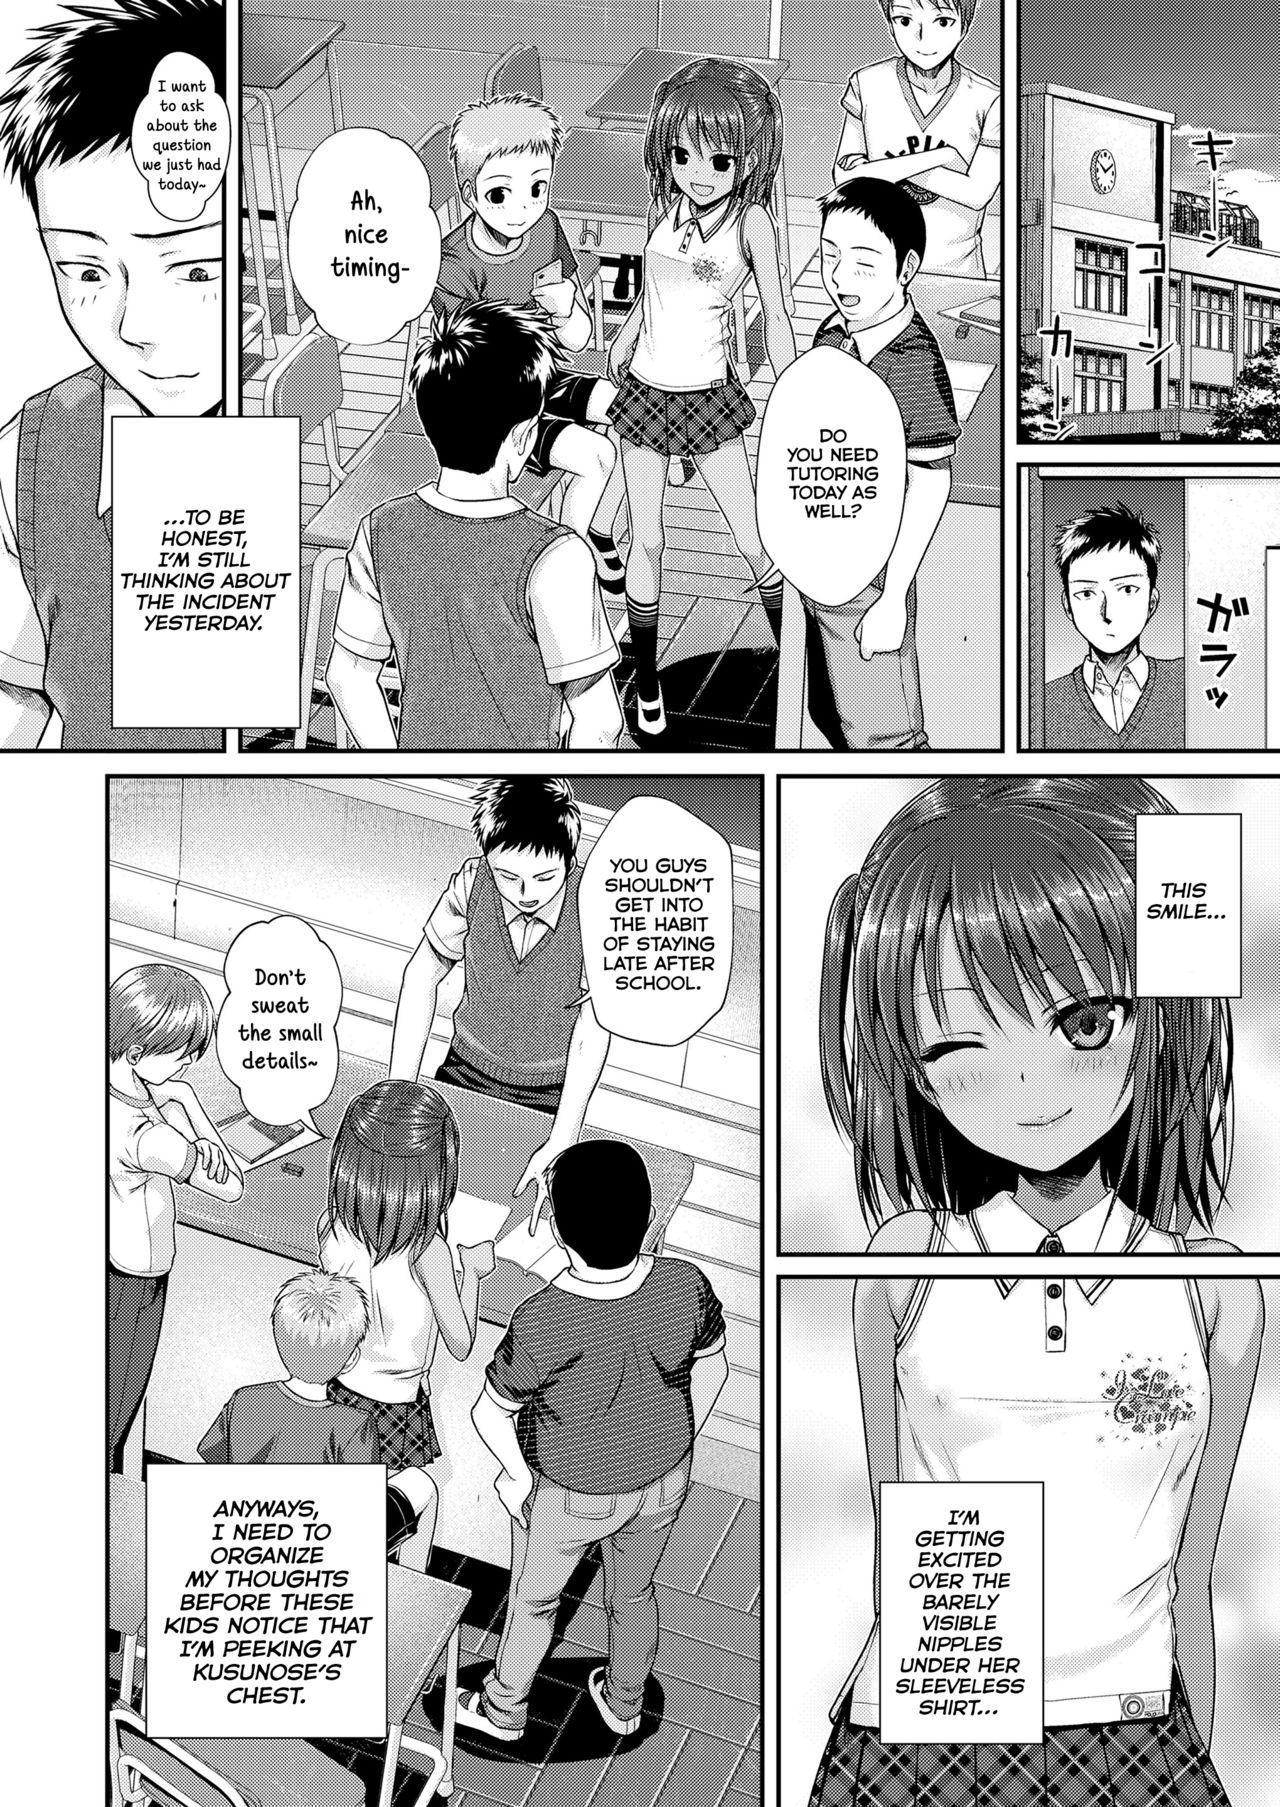 Dirty Talk Houkago wa Minna de | Together With Everyone After School Gay Physicalexamination - Page 8